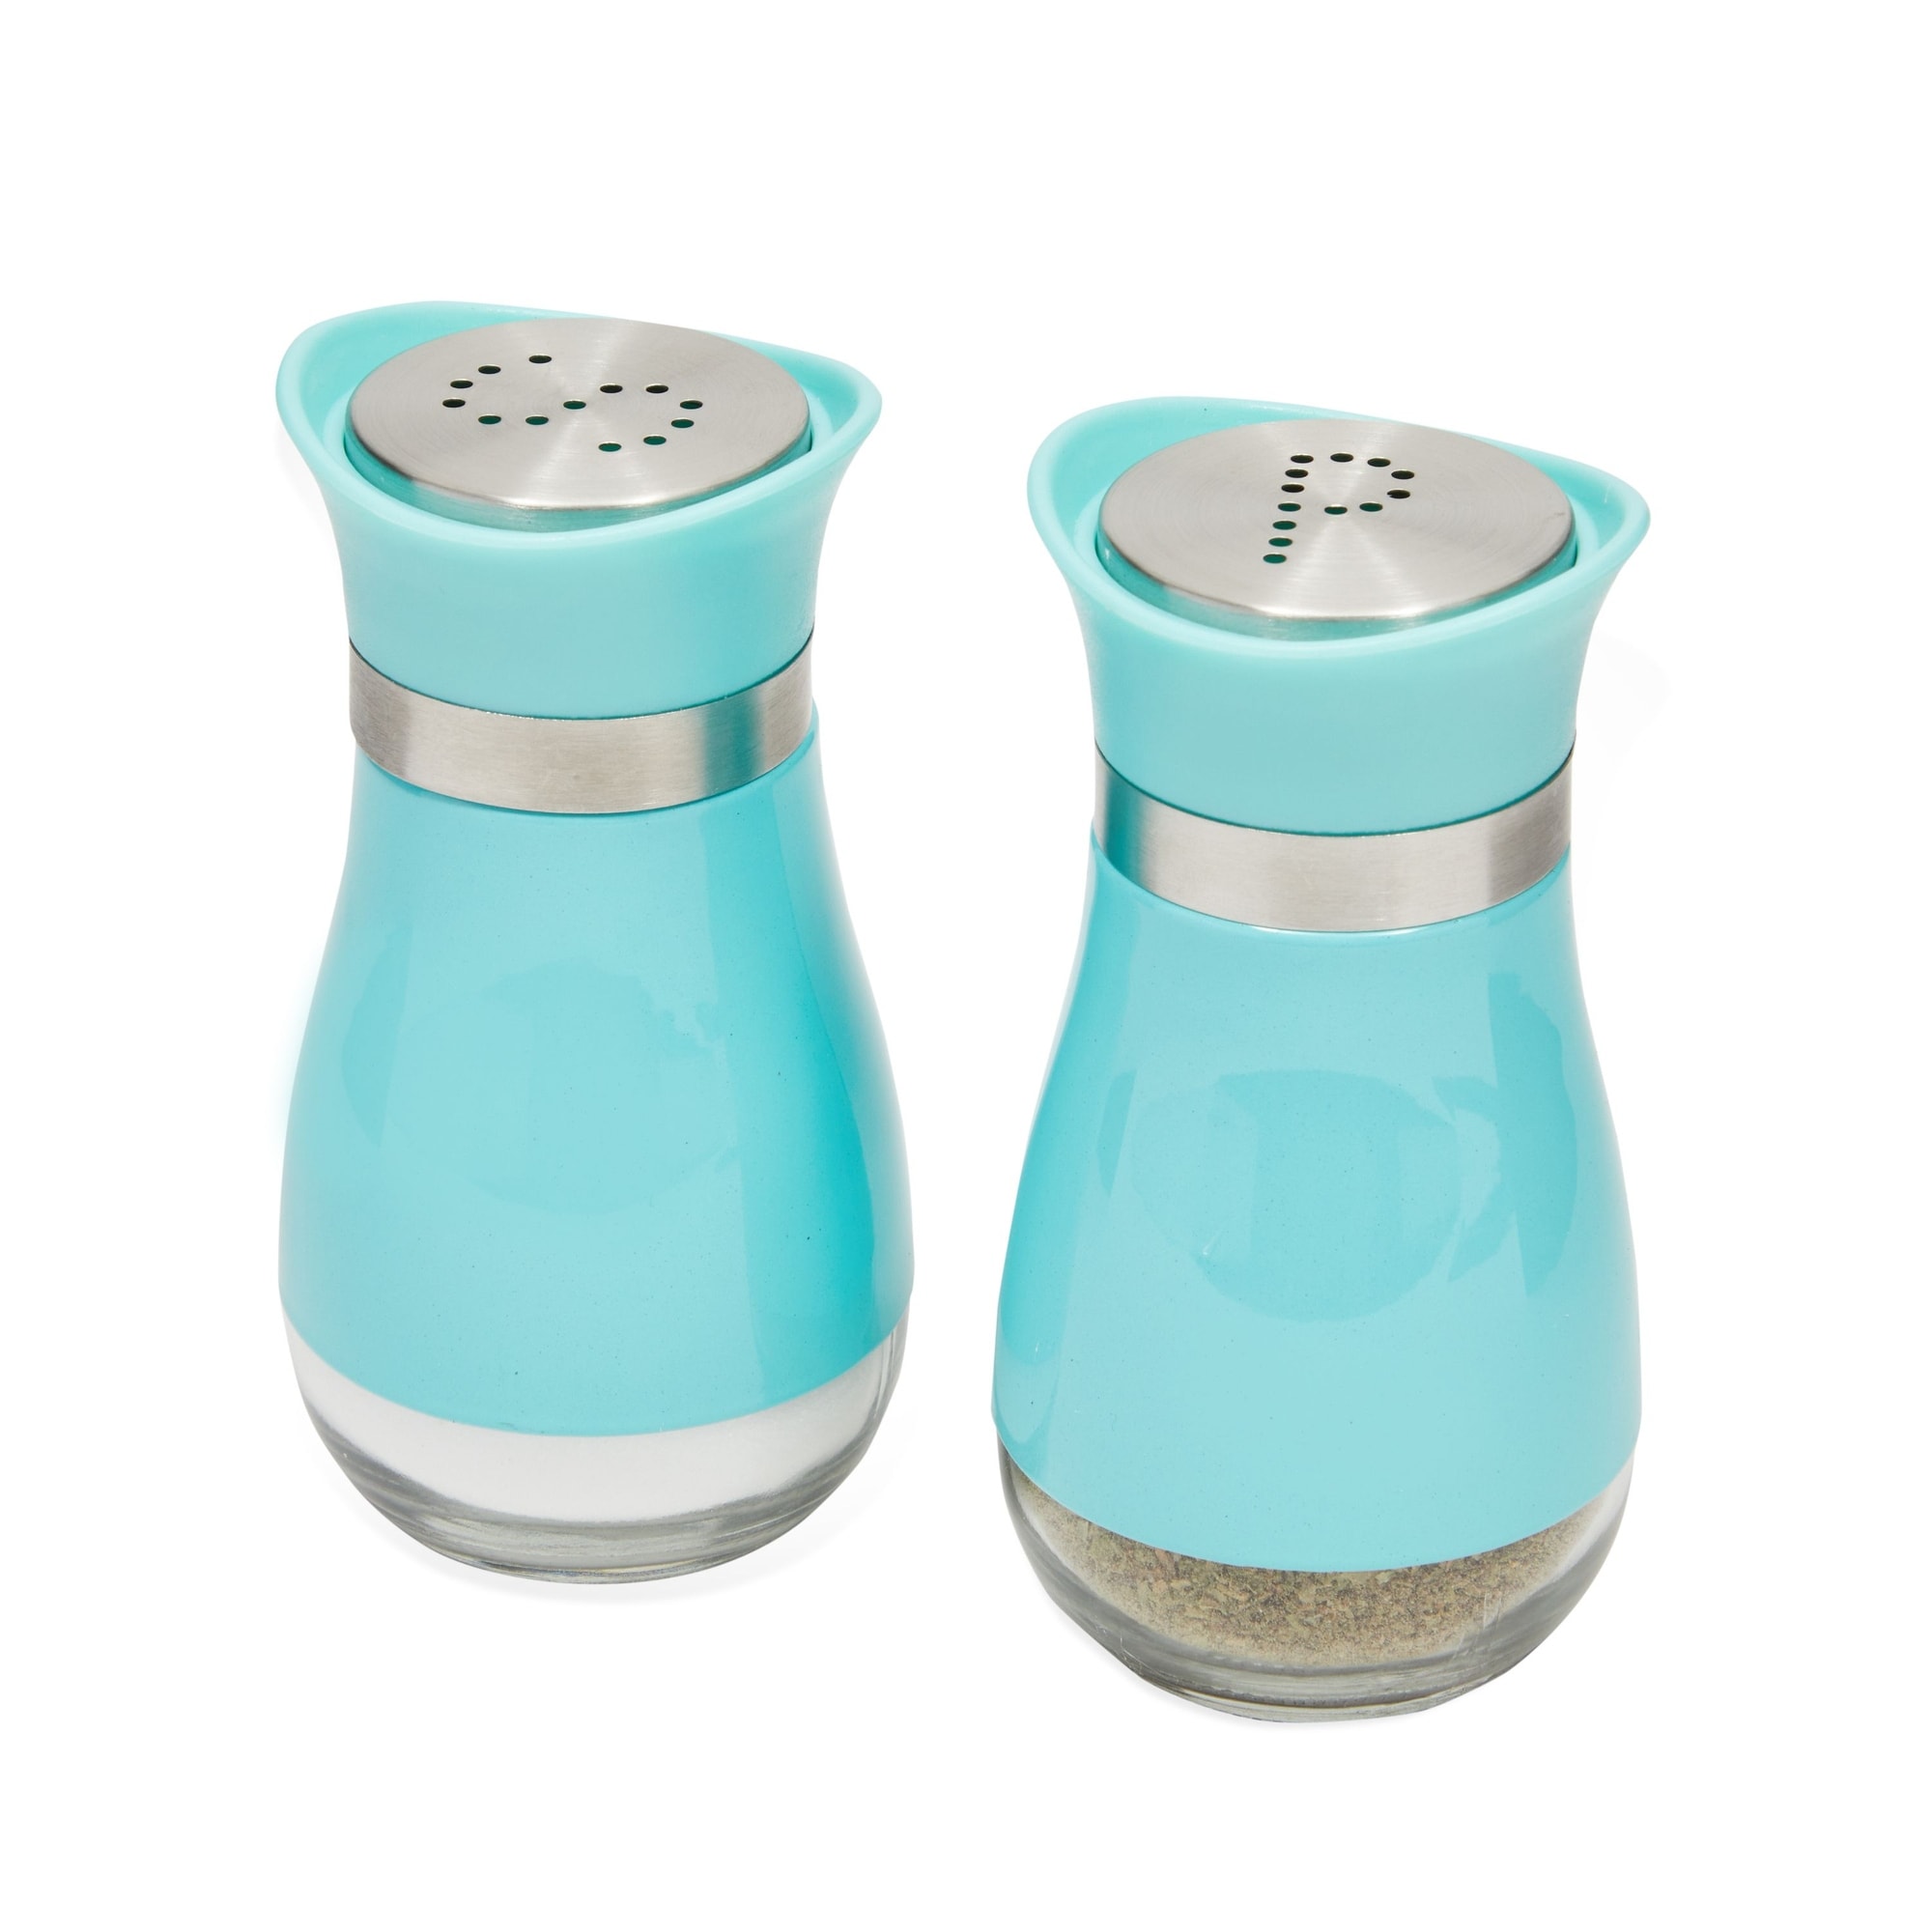 https://ak1.ostkcdn.com/images/products/is/images/direct/6610e9eac89bd8eb99cf89e9e7497078c2bae051/Teal-Salt-and-Pepper-Shakers-with-Glass-Bottom%2C-Stainless-Steel-Refillable-%282-Piece-Set%29.jpg